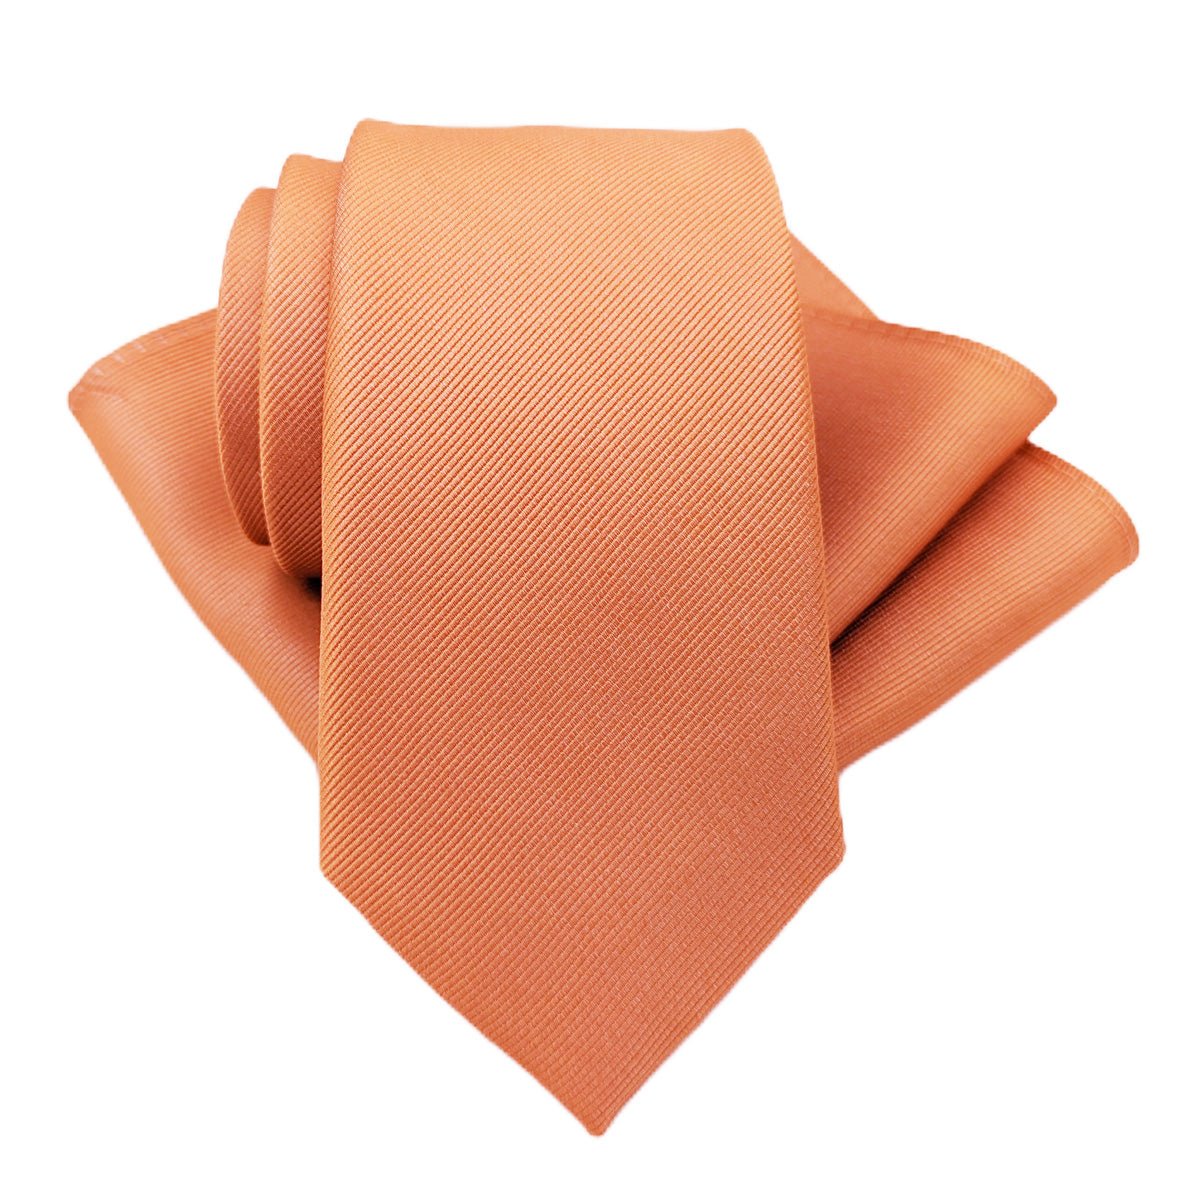 Copper Rose Silk Pocket Square - Wedding Pocket Square - - Swagger & Swoon